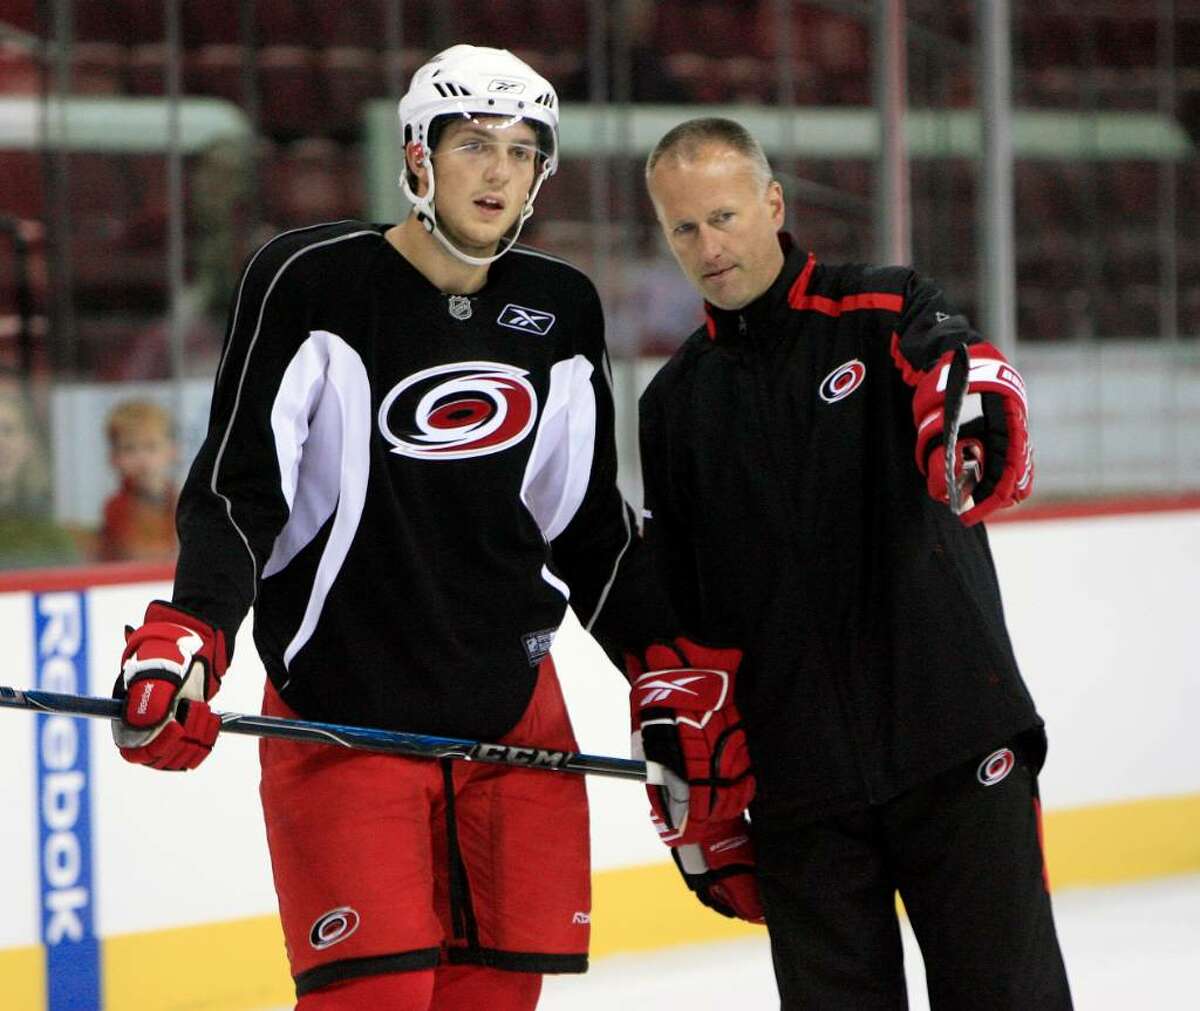 Brett Carson, left, gets some direction from coach Tom Barrasso during the Hurricanes' practice at the RBC Center in Raleigh, N.C. (Chris Seward/News&Observer)